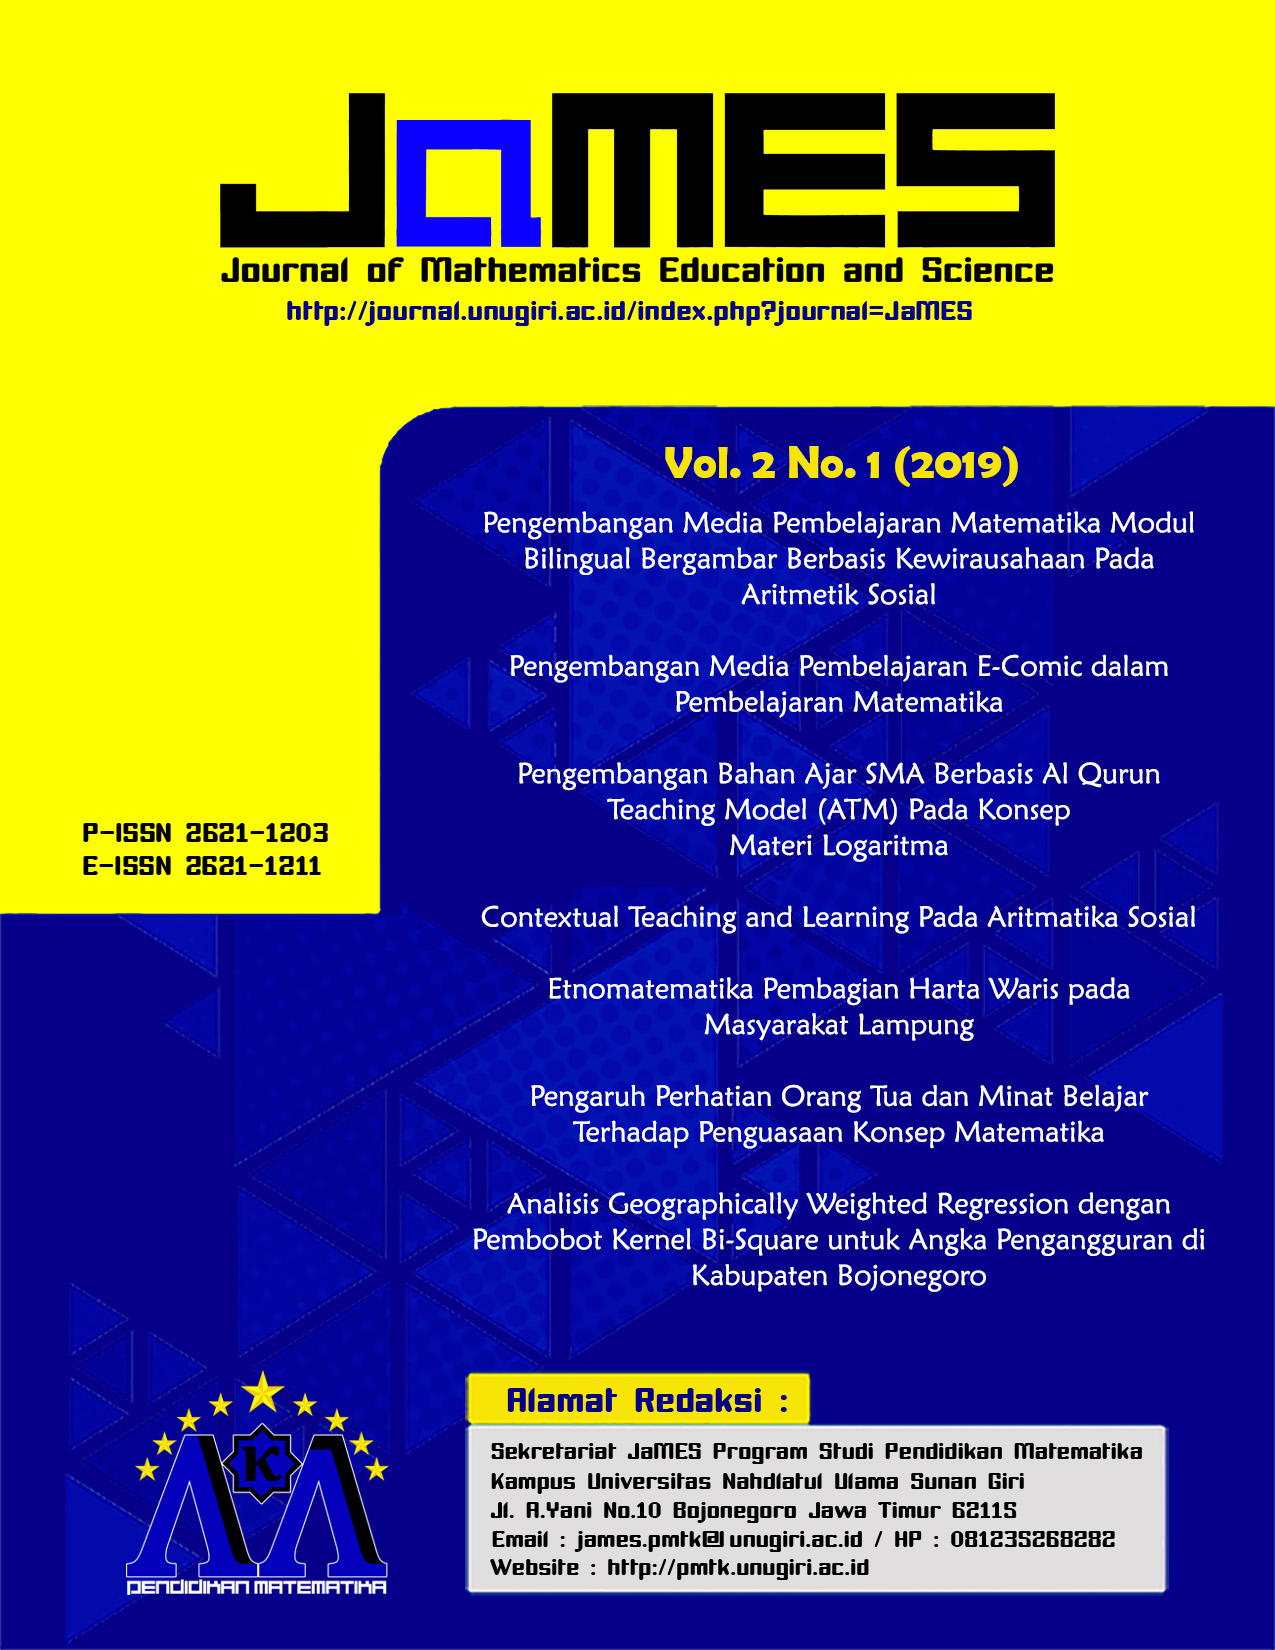 					View Vol. 2 No. 1 (2019): Journal of Mathematics Education and Science
				